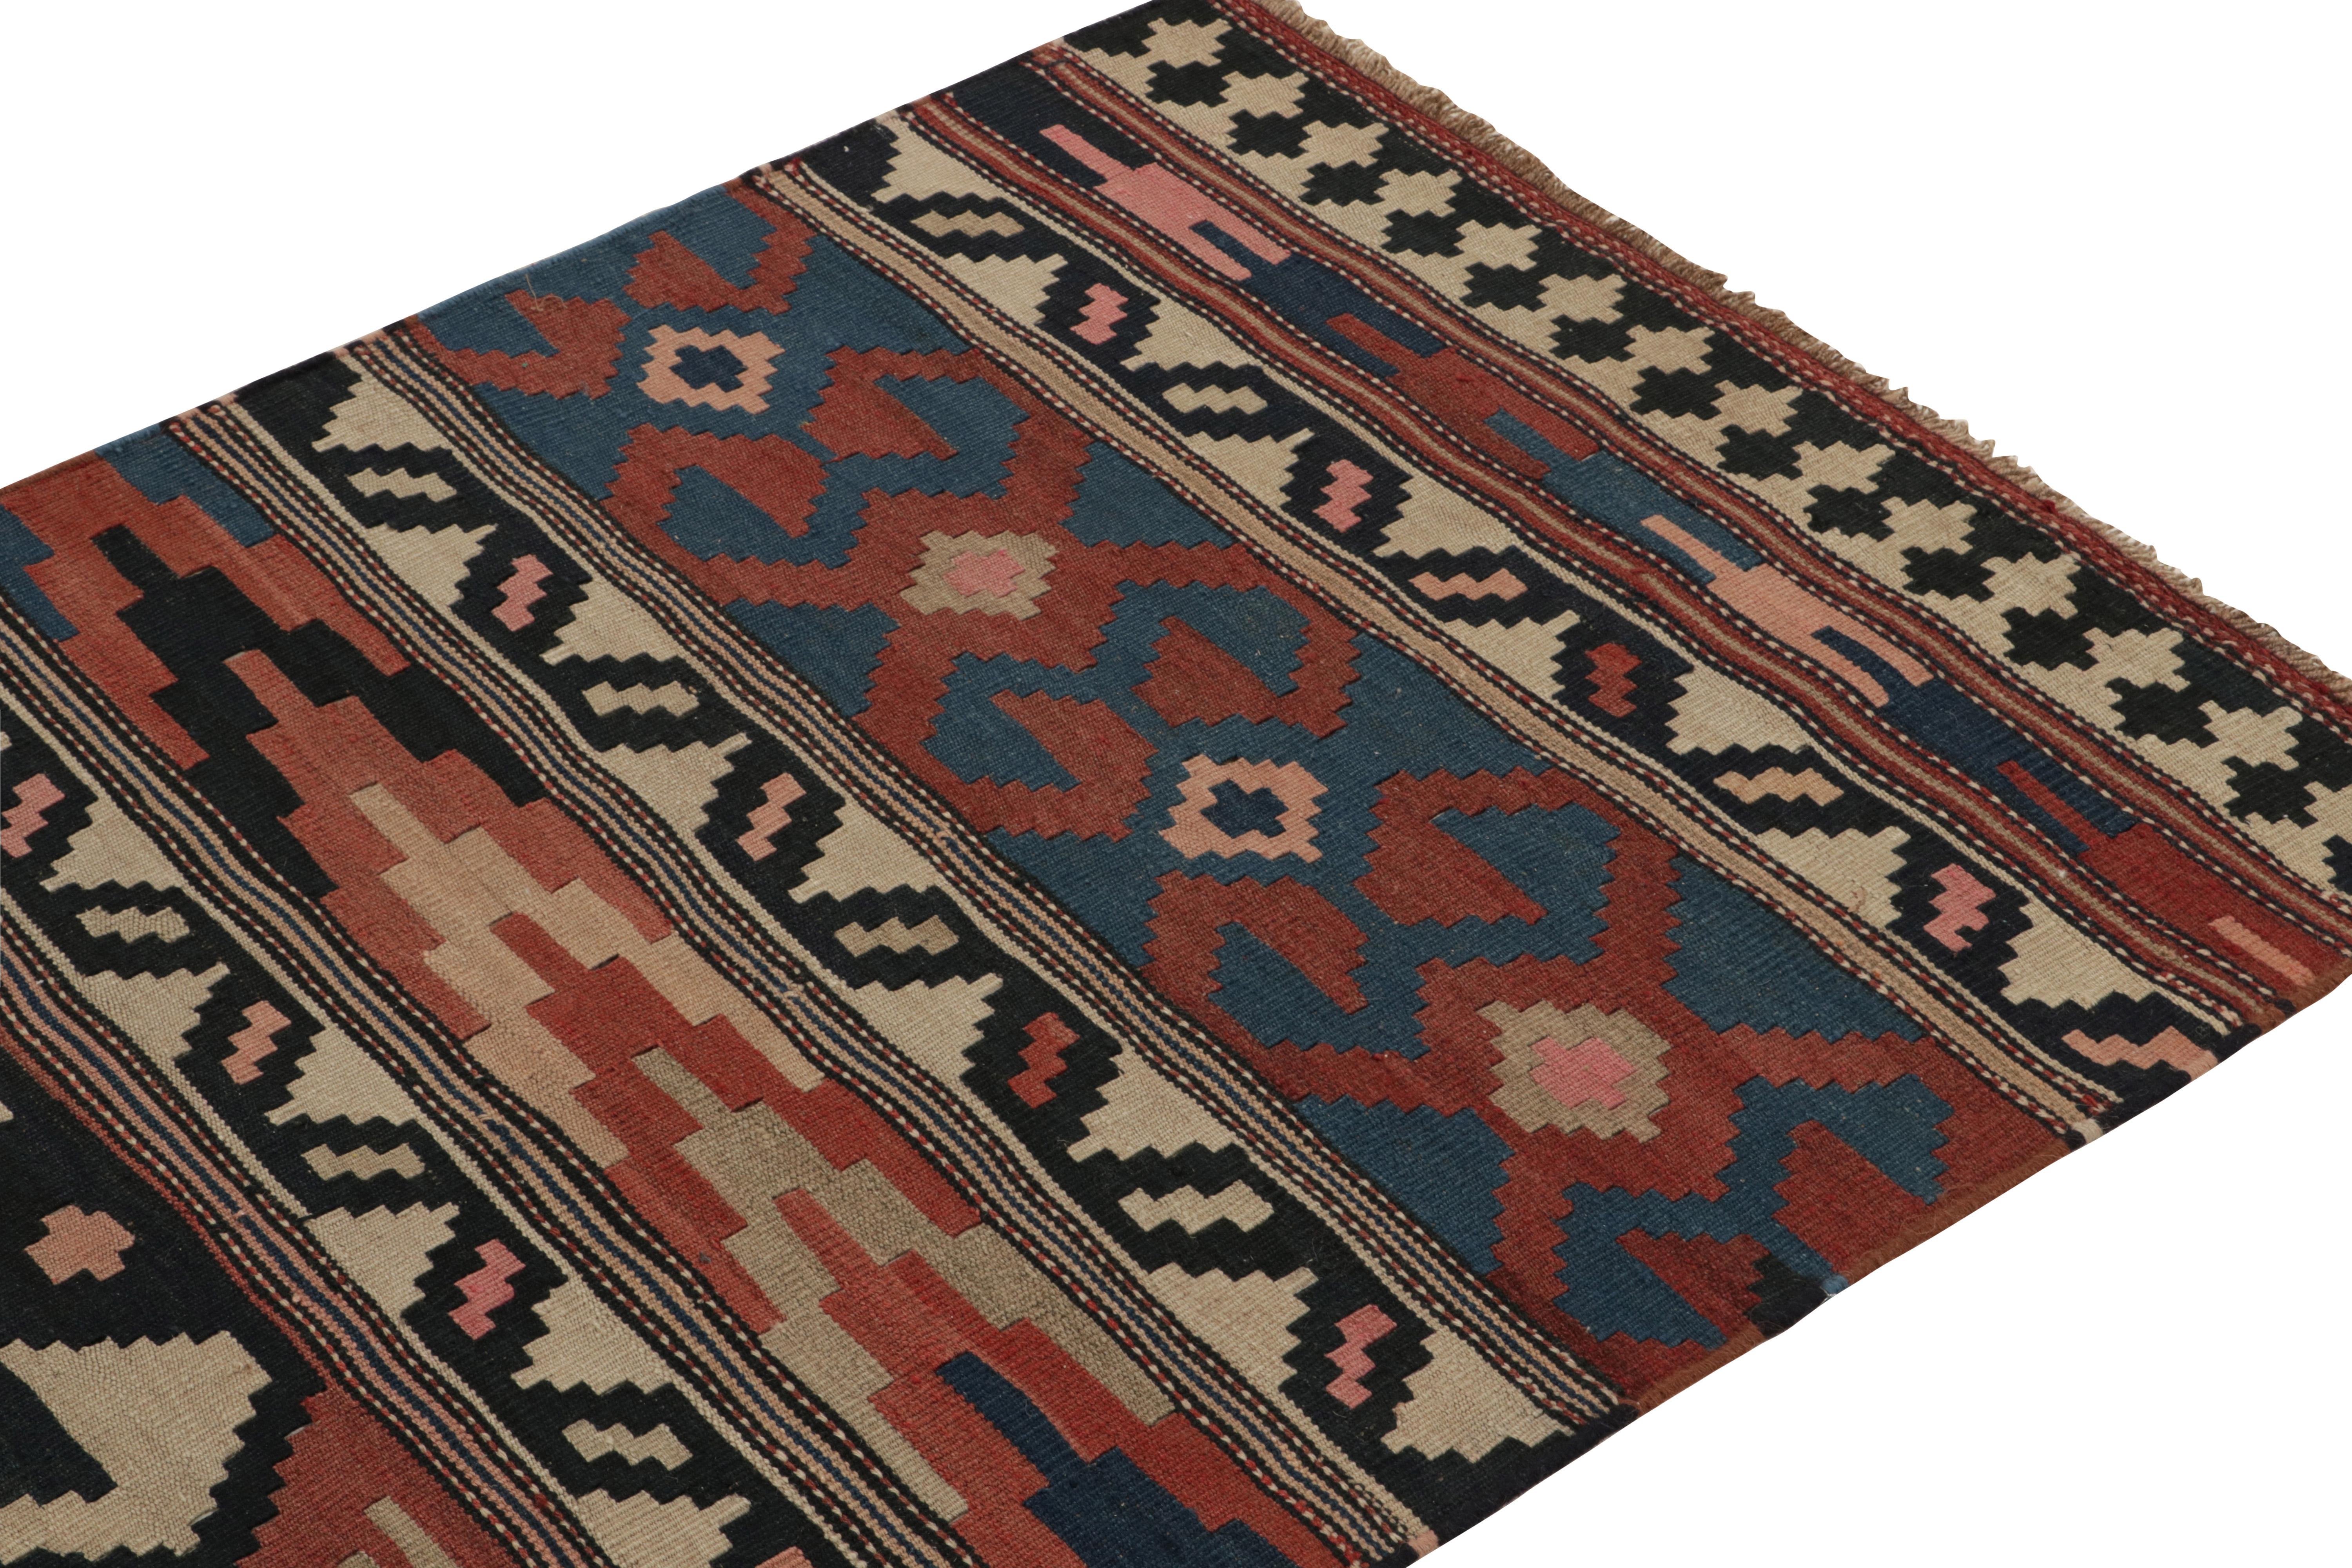 Hand-Knotted 1950s Vintage Kilim Runner in Red with Beige Tribal Patterns by Rug & Kilim